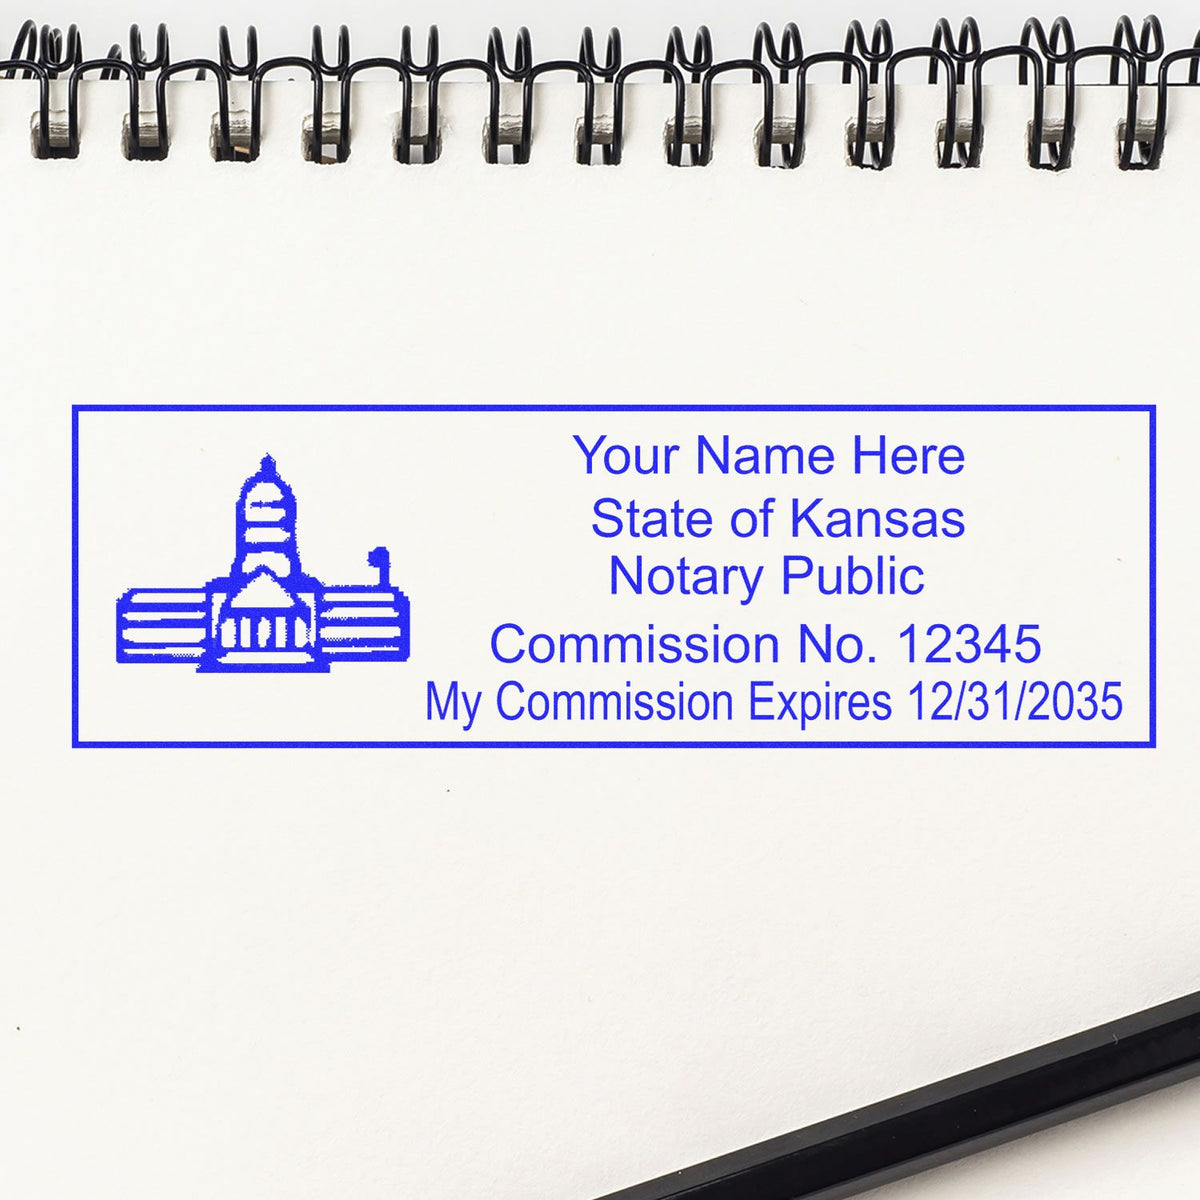 A photograph of the Heavy-Duty Kansas Rectangular Notary Stamp stamp impression reveals a vivid, professional image of the on paper.